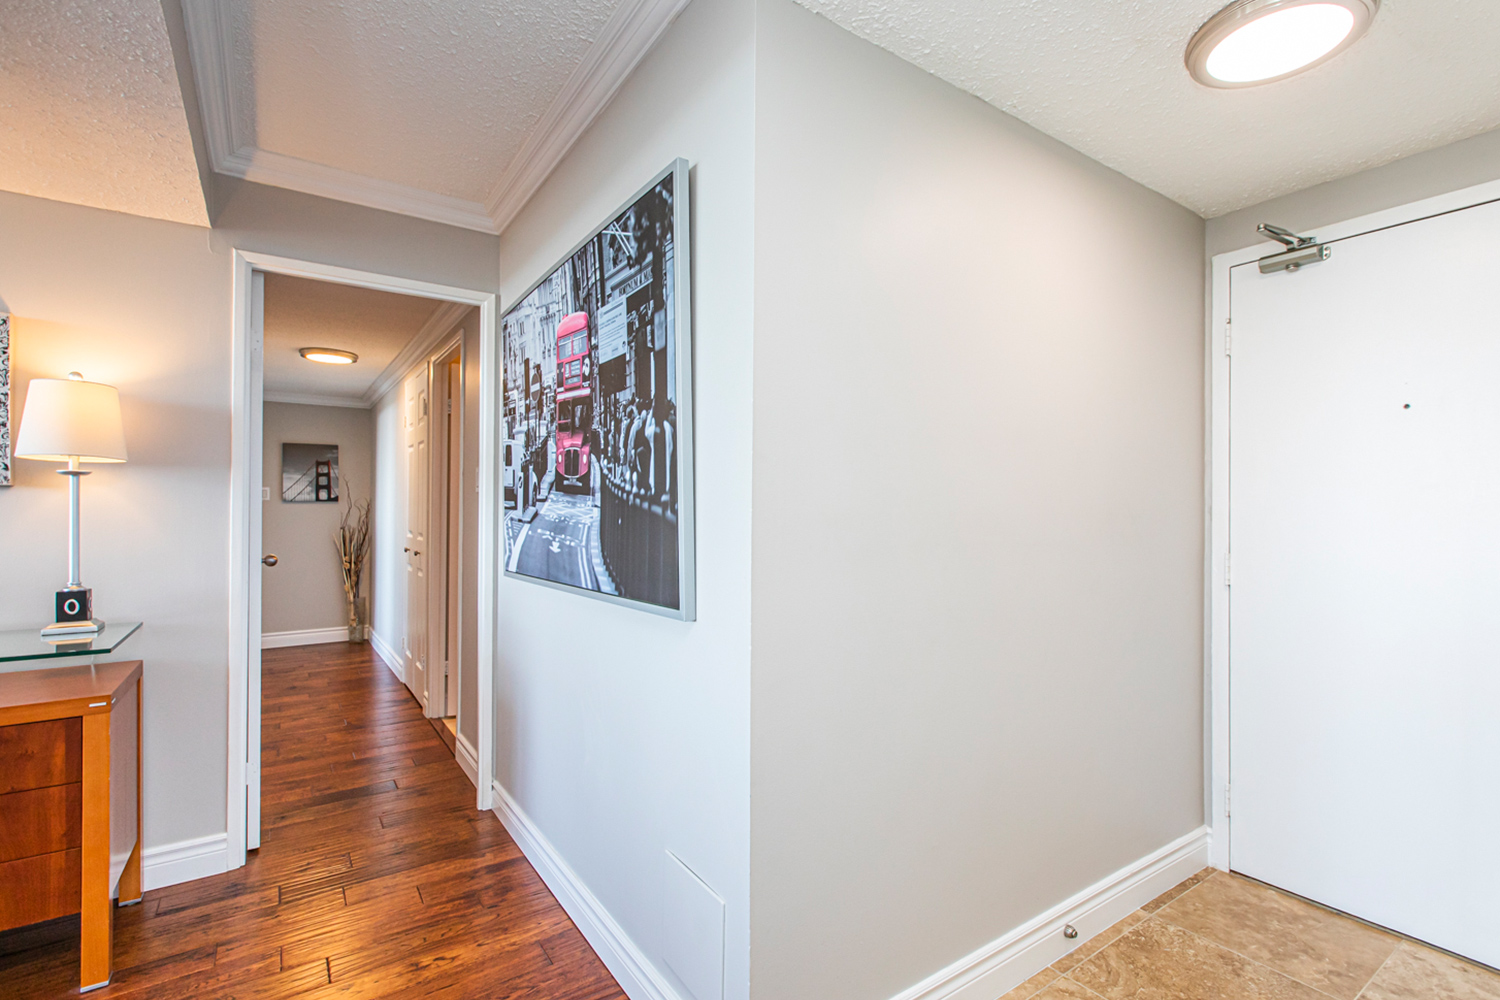 Listing__1530-530-Laurier-Ave-W__02